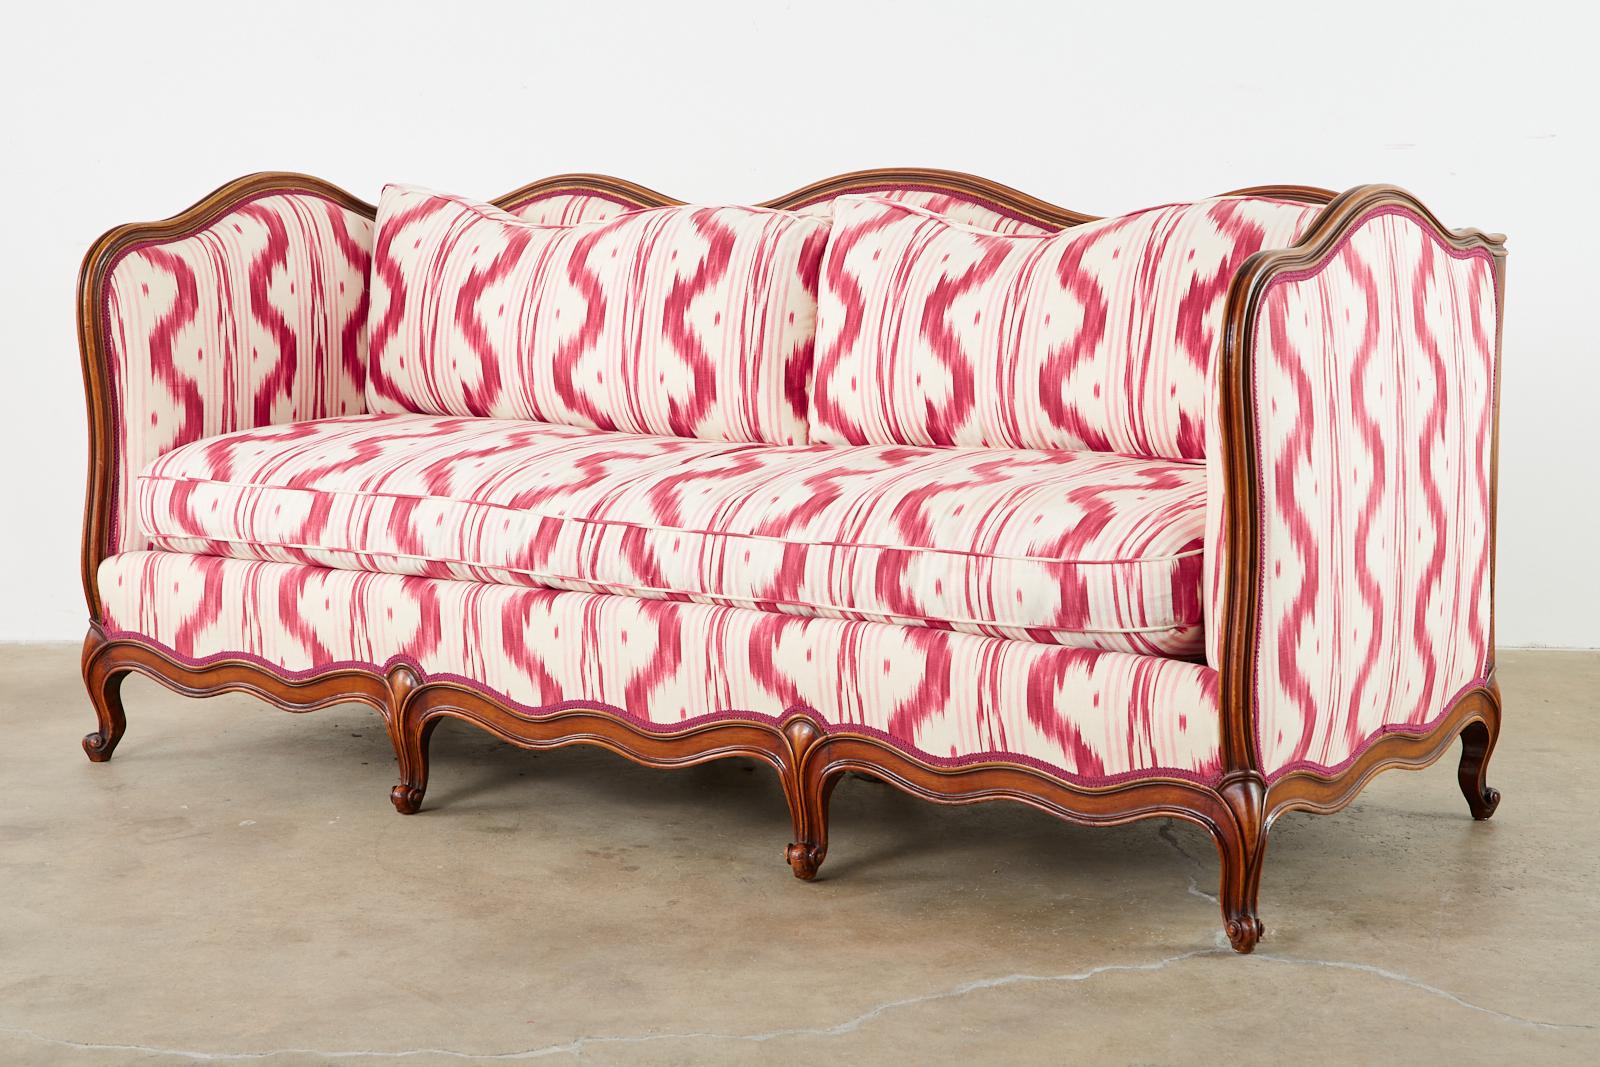 Hand-Crafted French Provincial Serpentine Canape Settee Pierre Frey Toile Ikat